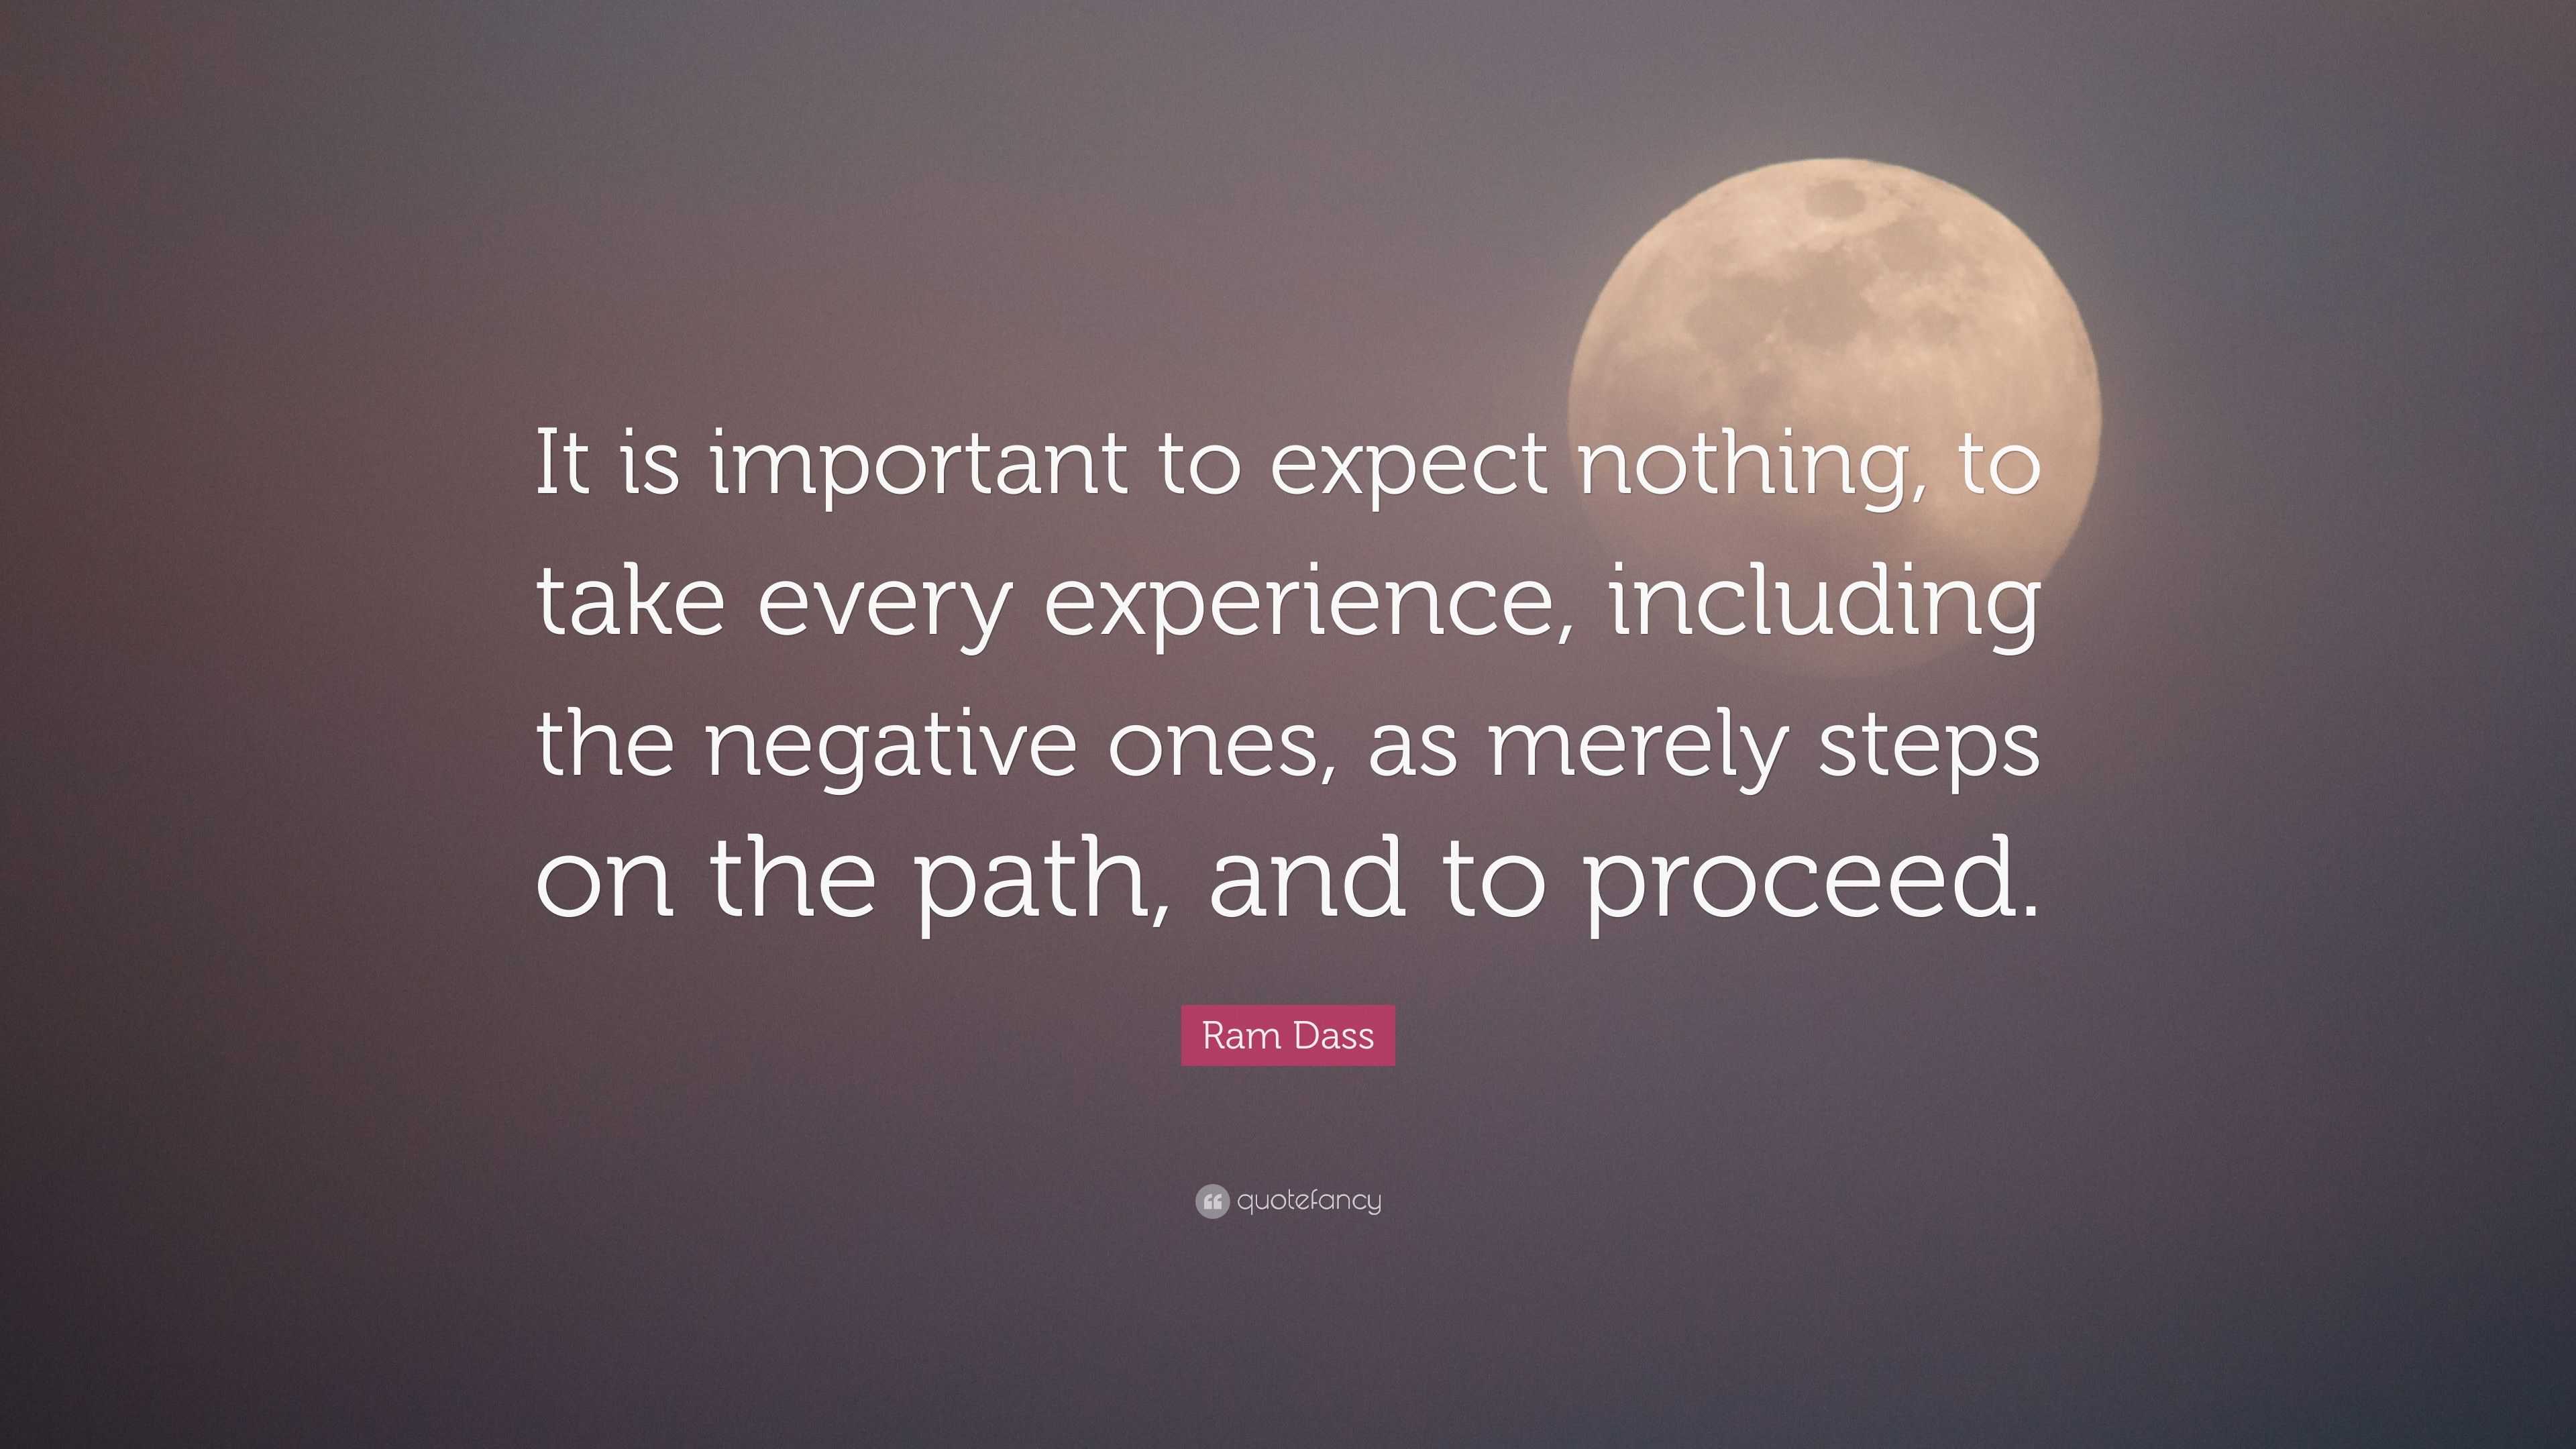 Ram Dass Quote: “It is important to expect nothing, to take every ...